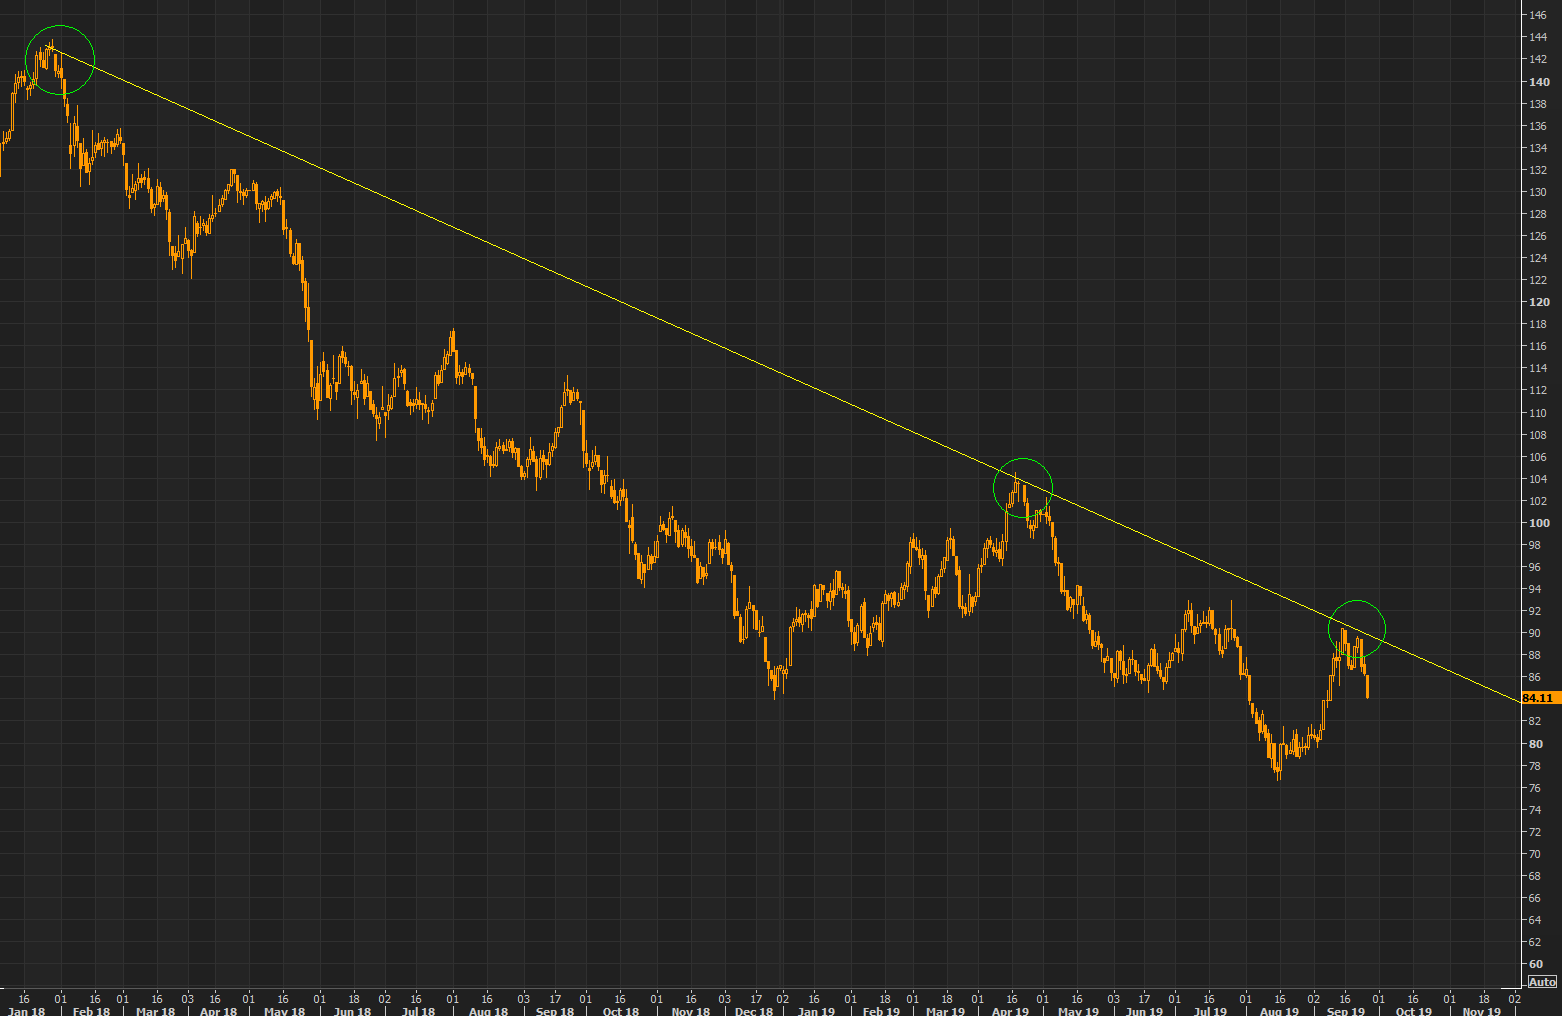 Euro banks -  another perfect reversal on the longer term down trend line